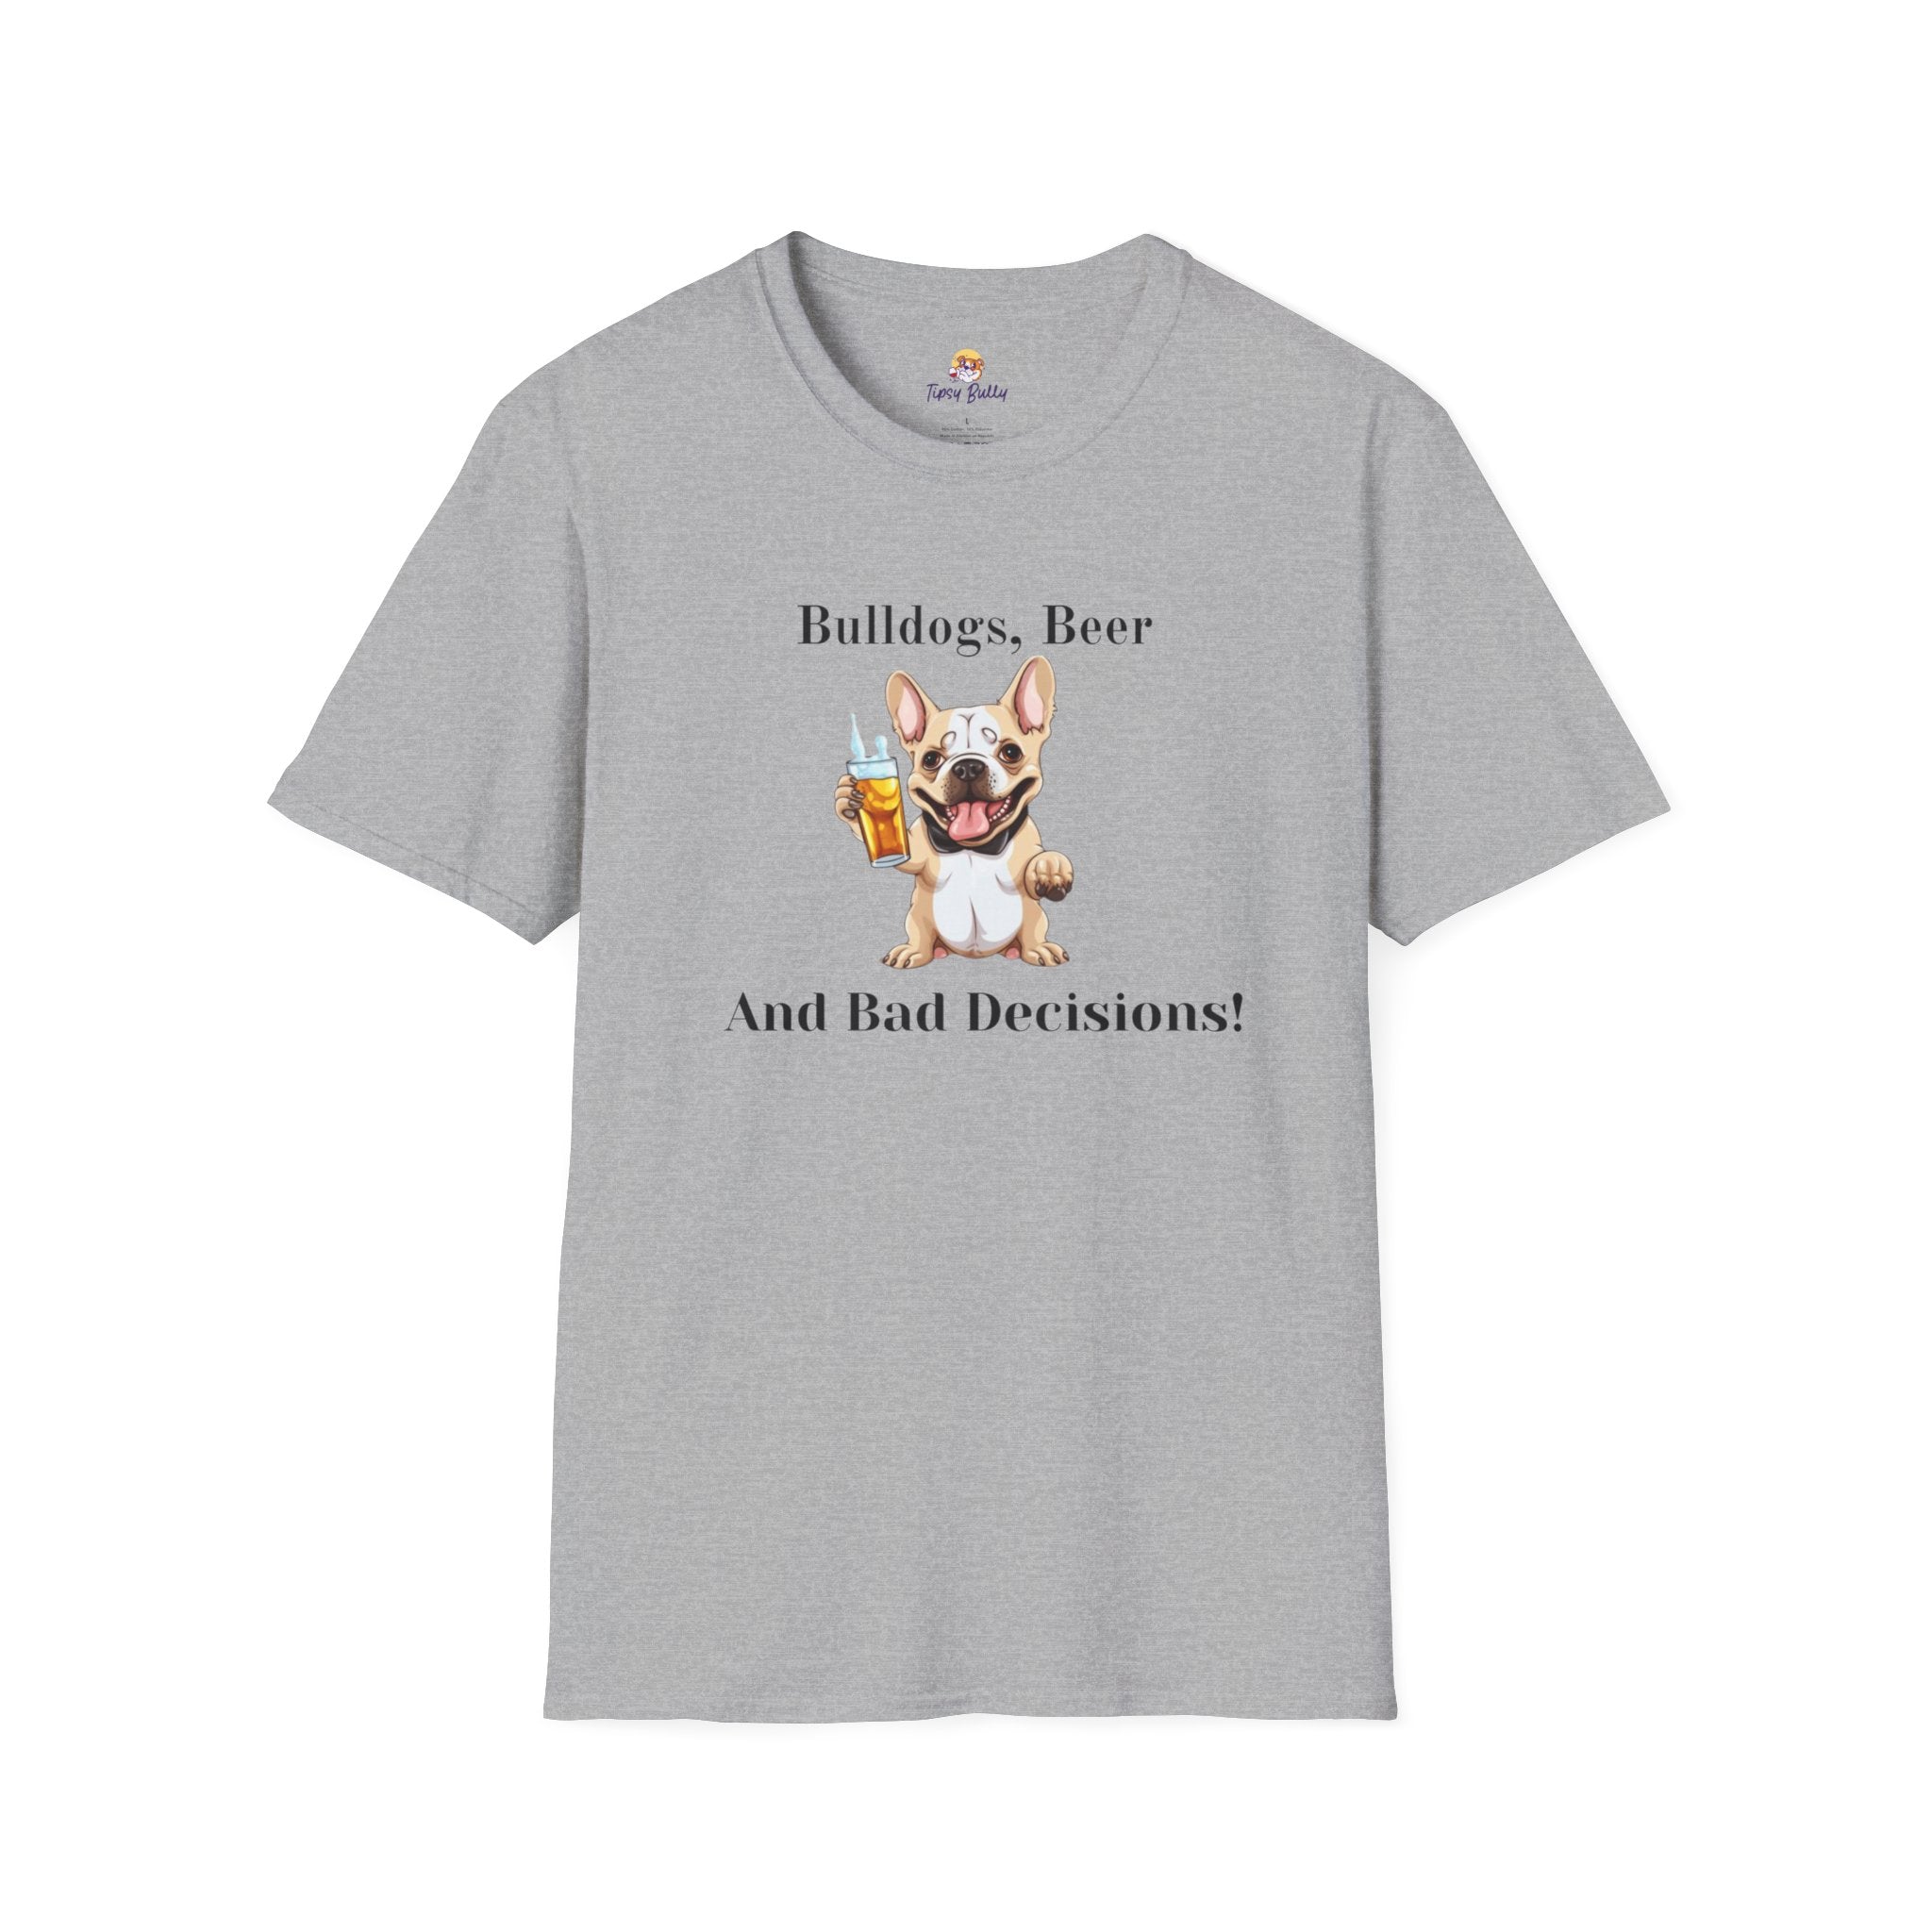 Bulldogs, Beer, and Bad Decisions" Unisex T-Shirt by Tipsy Bully (French/White)